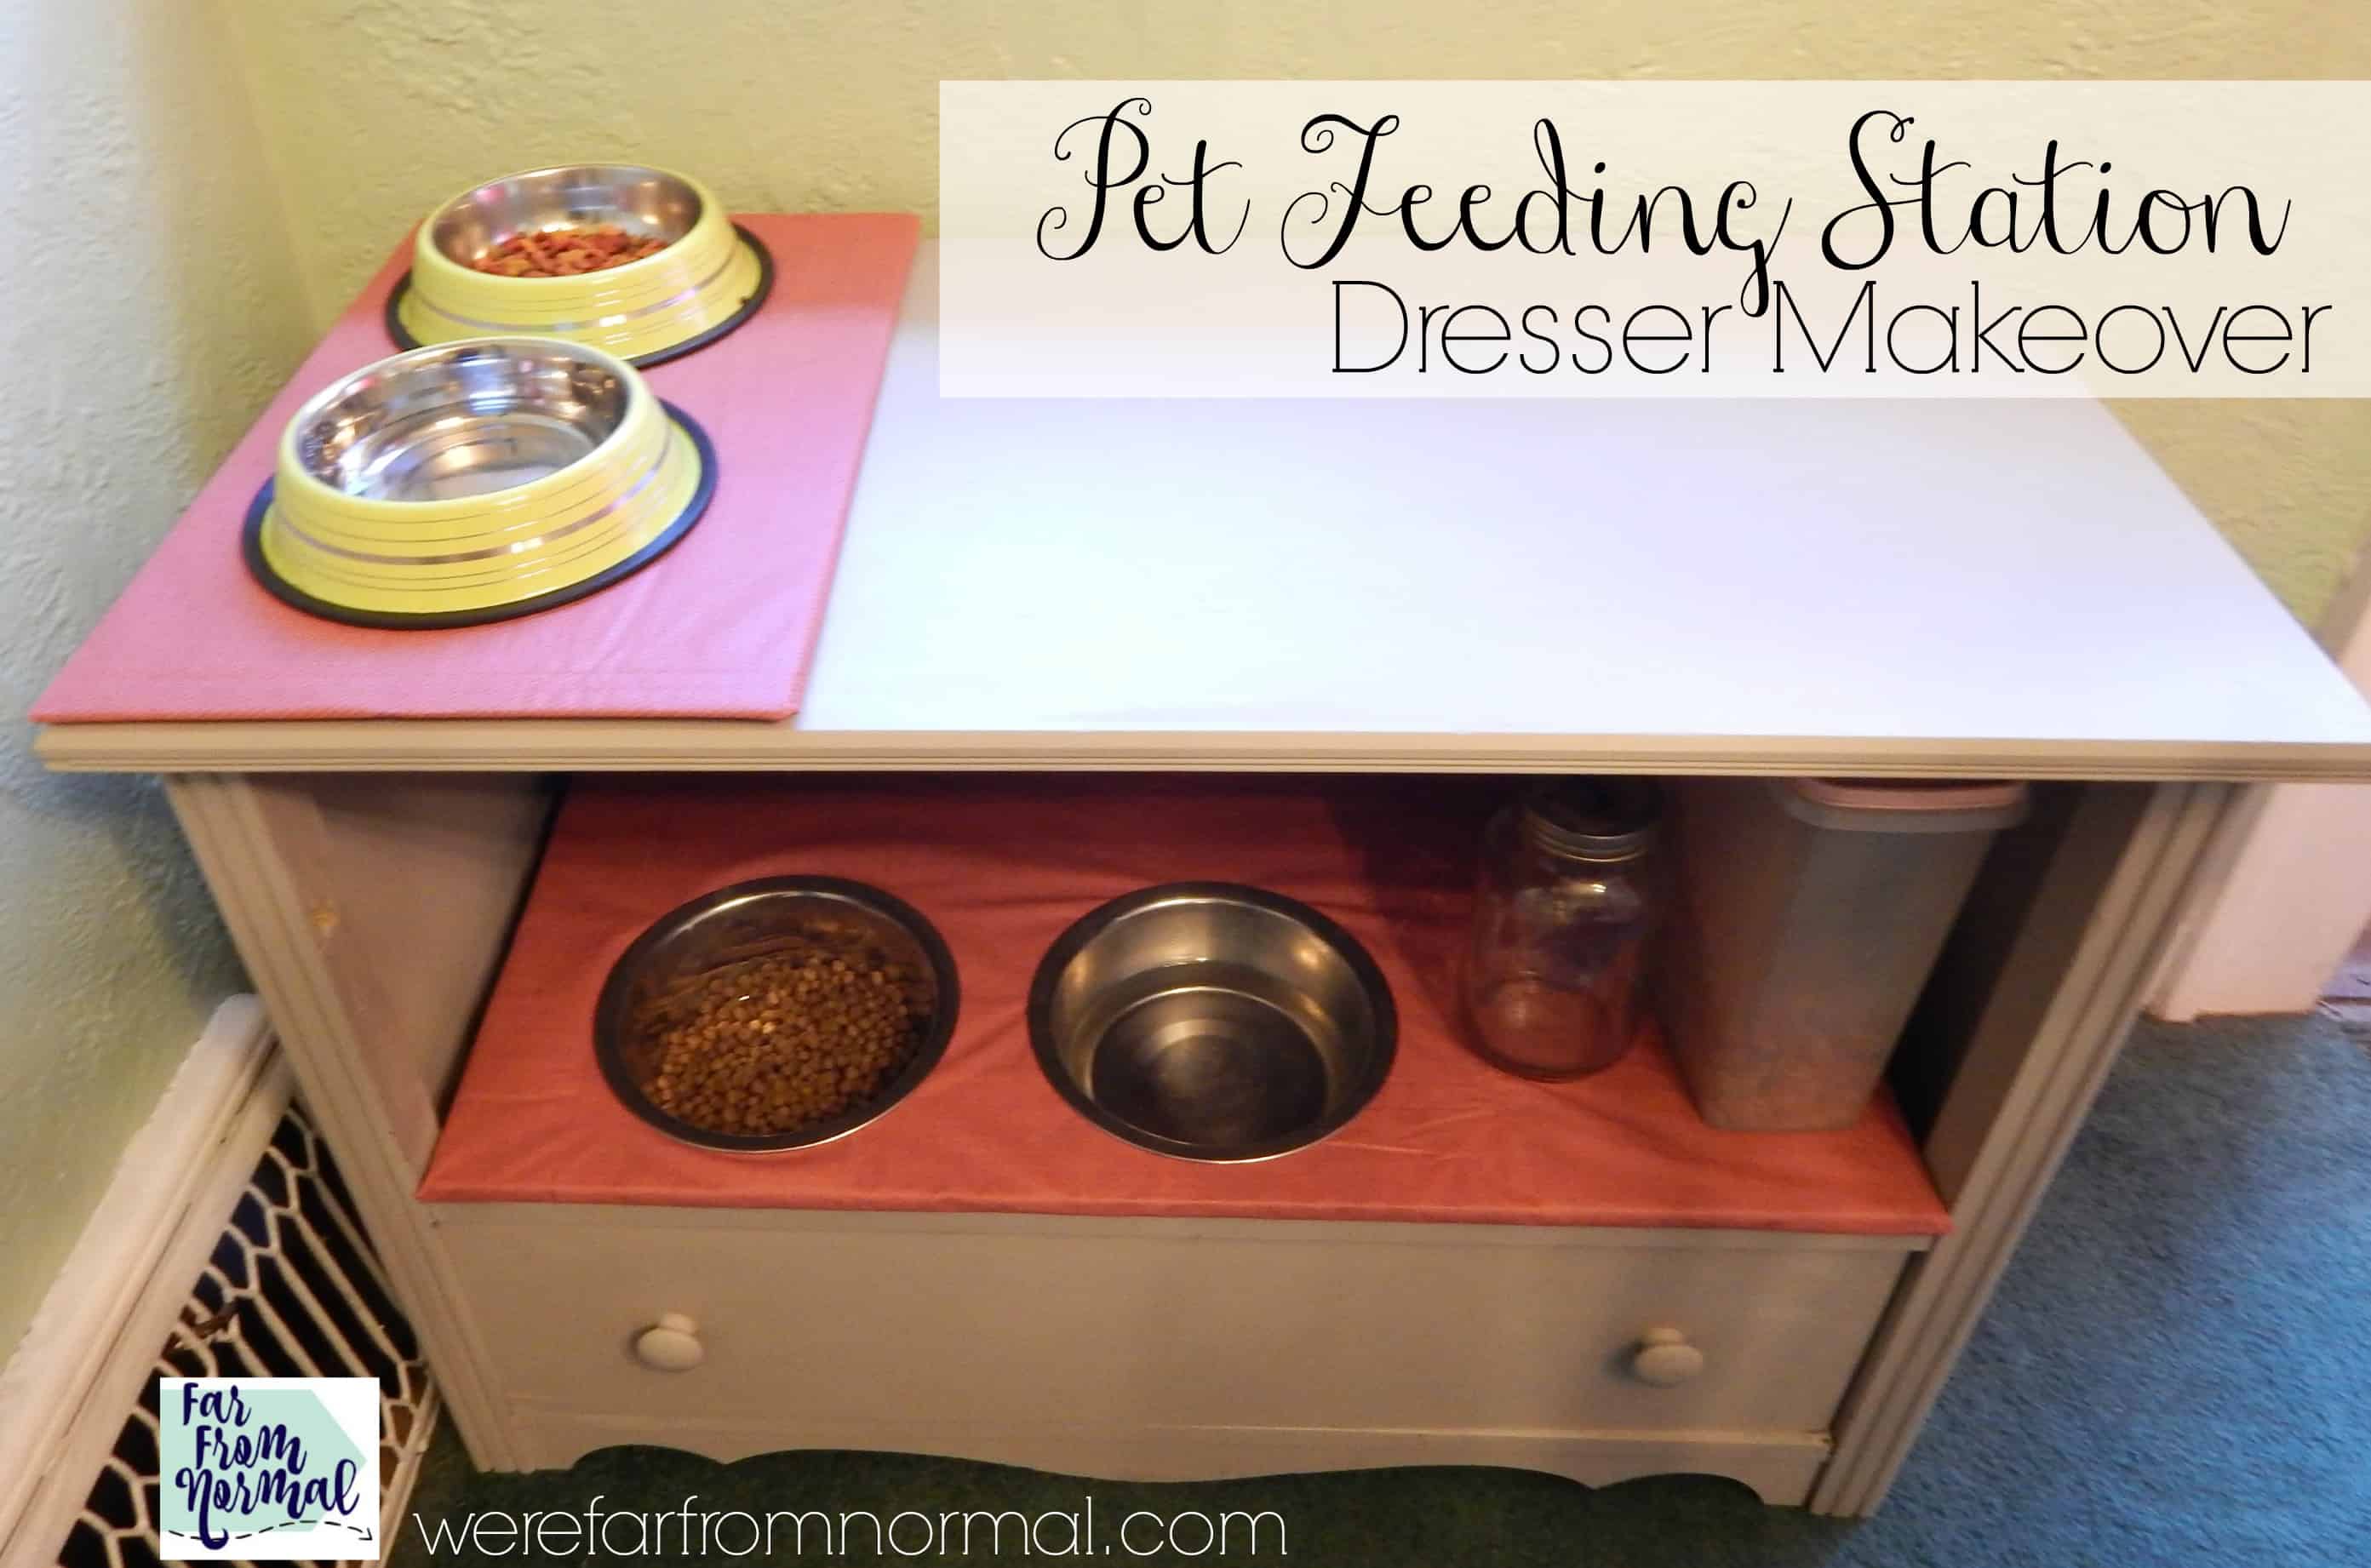 https://werefarfromnormal.com/wp-content/uploads/2016/08/Transform-an-old-dresser-into-a-pet-feeding-station-for-your-furry-friends-Keep-everything-organized-and-looking-lovely-.jpg